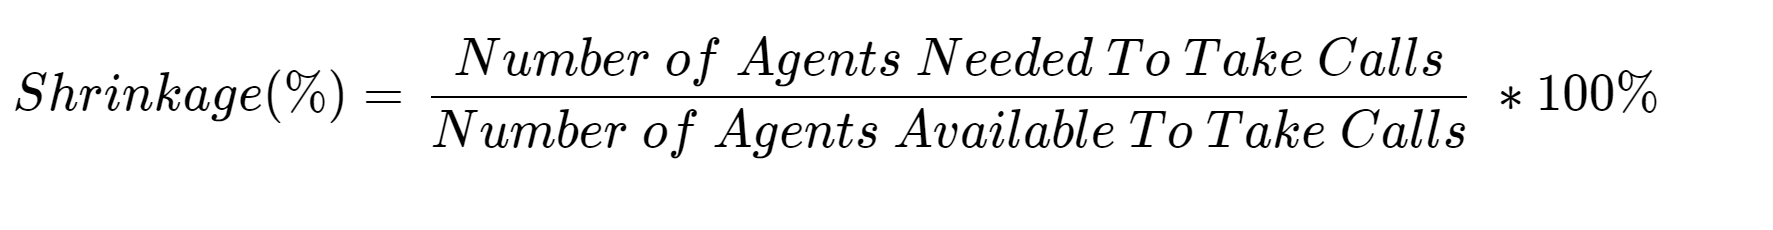 call center shrinkage in terms of number of agents